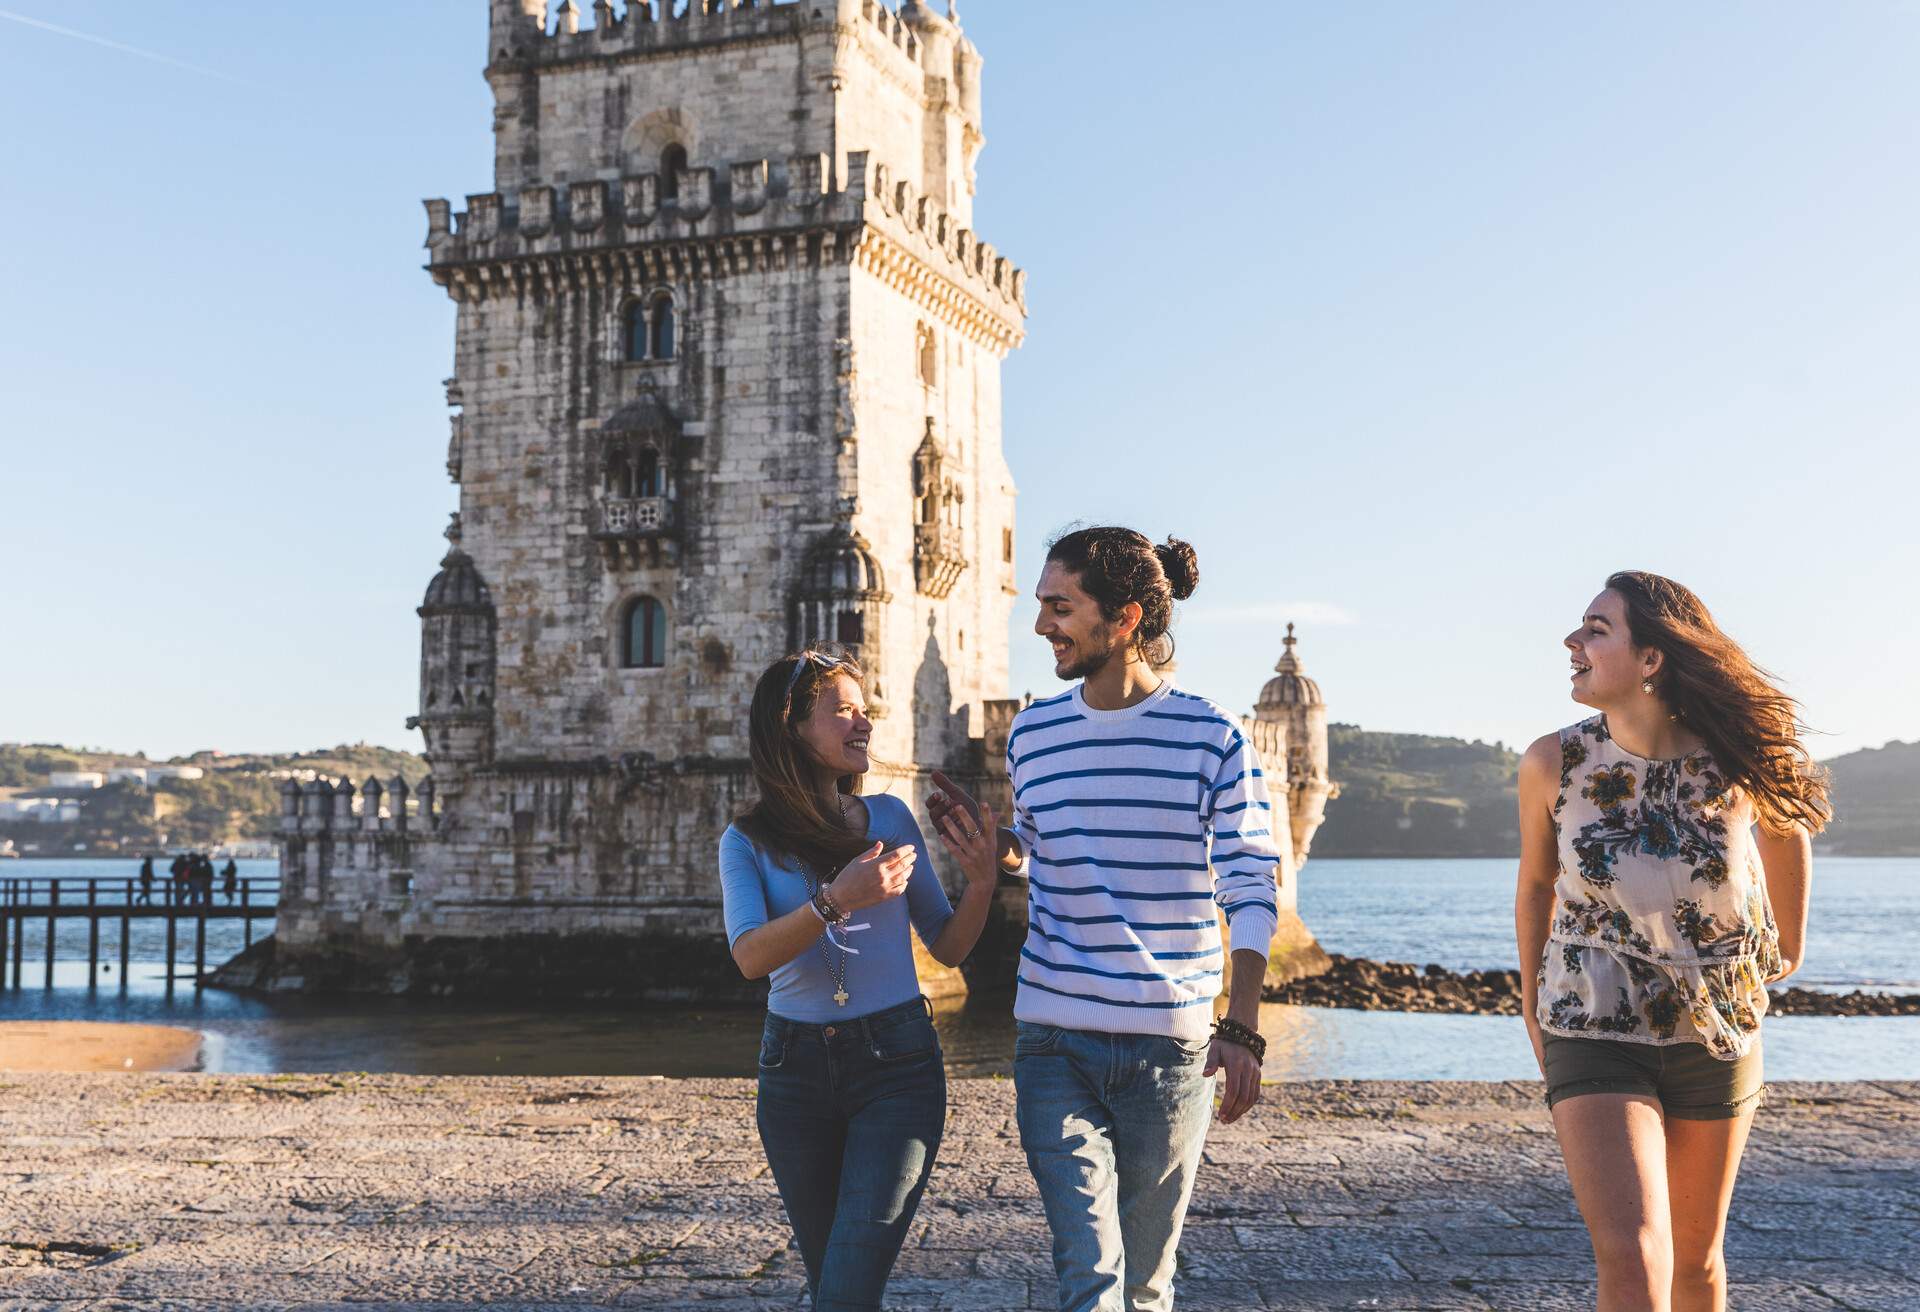 Three young people walking on a riverside promenade with the Belém Tower behind them.